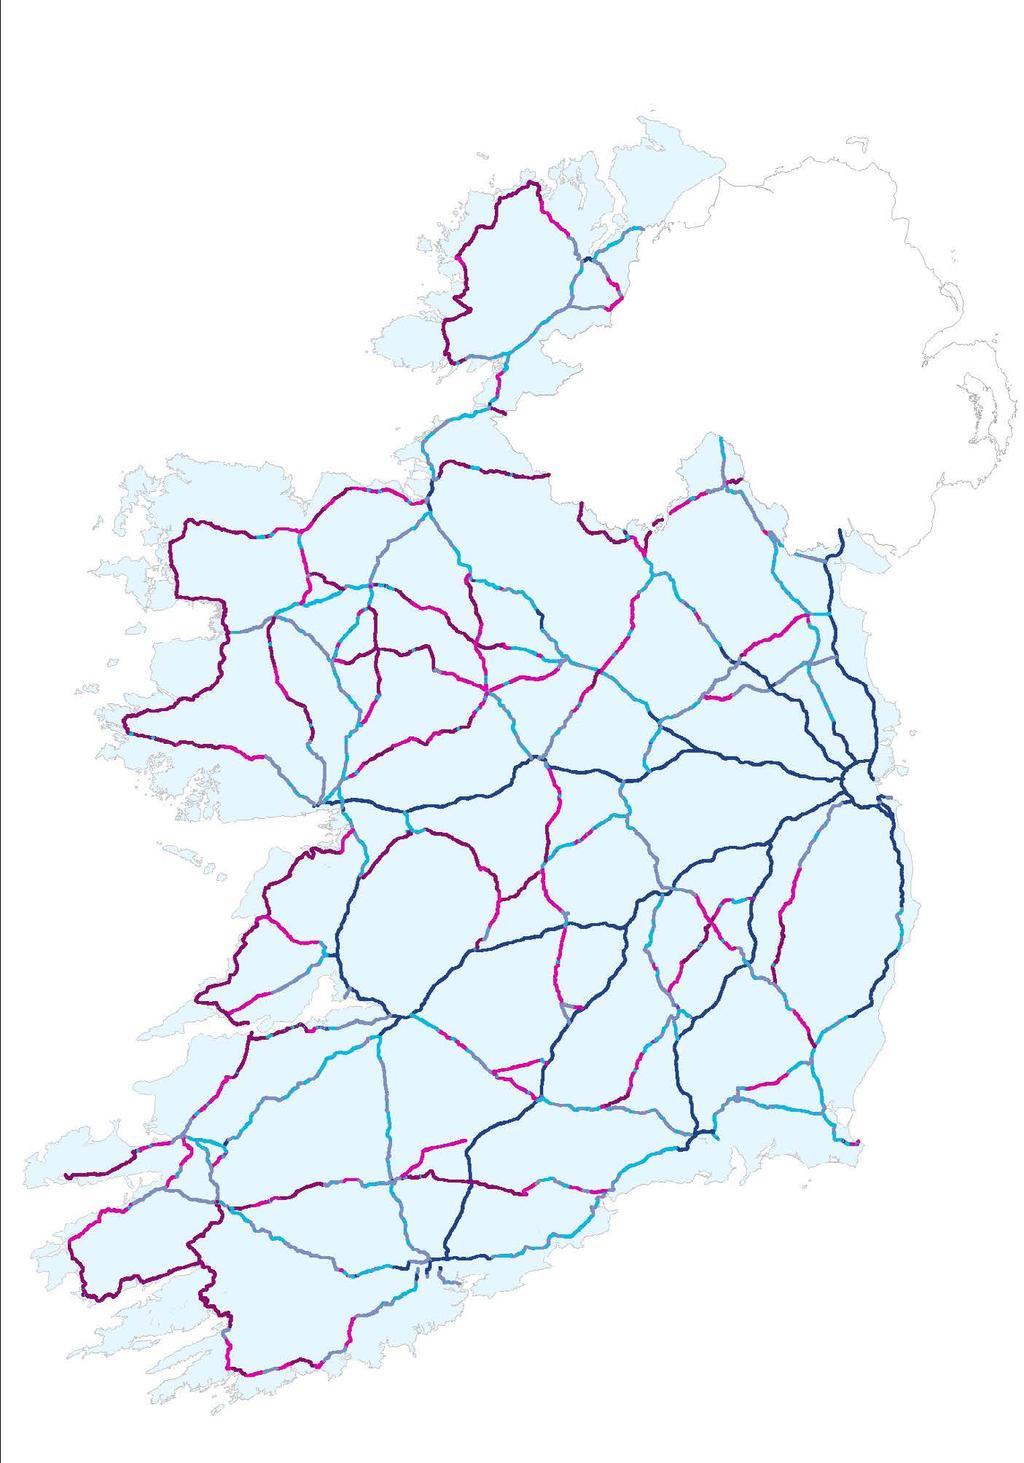 THREE ROAD CONDITION A: PAVEMENT MAINTENANCE Overview of the status of the road pavement across the National Road network by subnetwork type 22 The National Road network consists of over 5,400